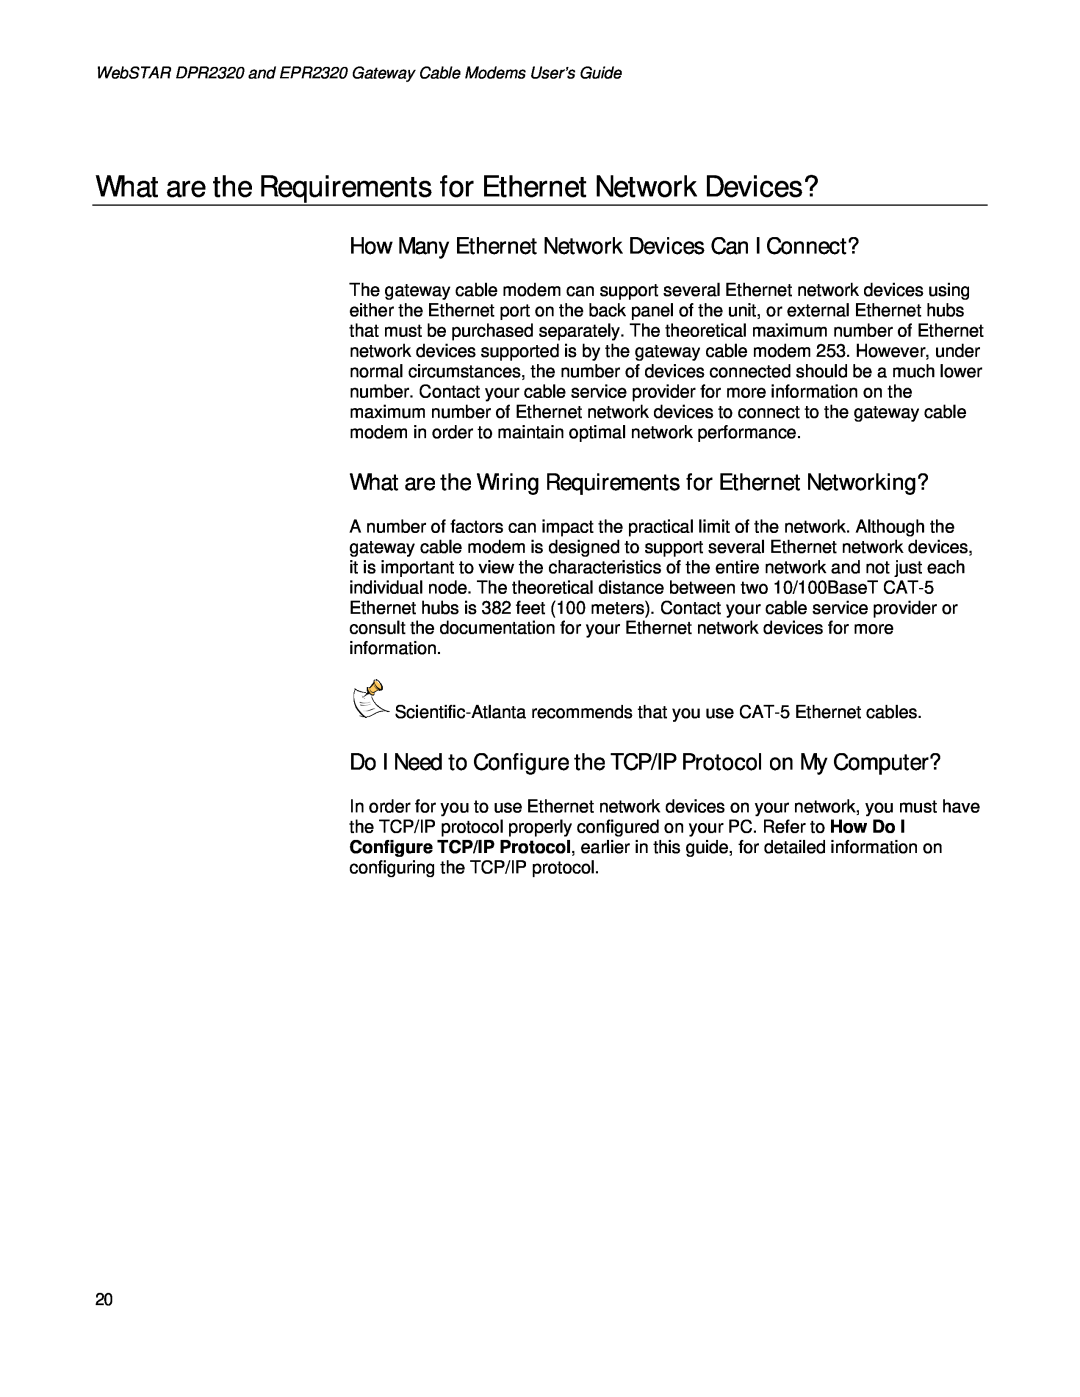 Apple DPR2320TM What are the Requirements for Ethernet Network Devices?, How Many Ethernet Network Devices Can I Connect? 